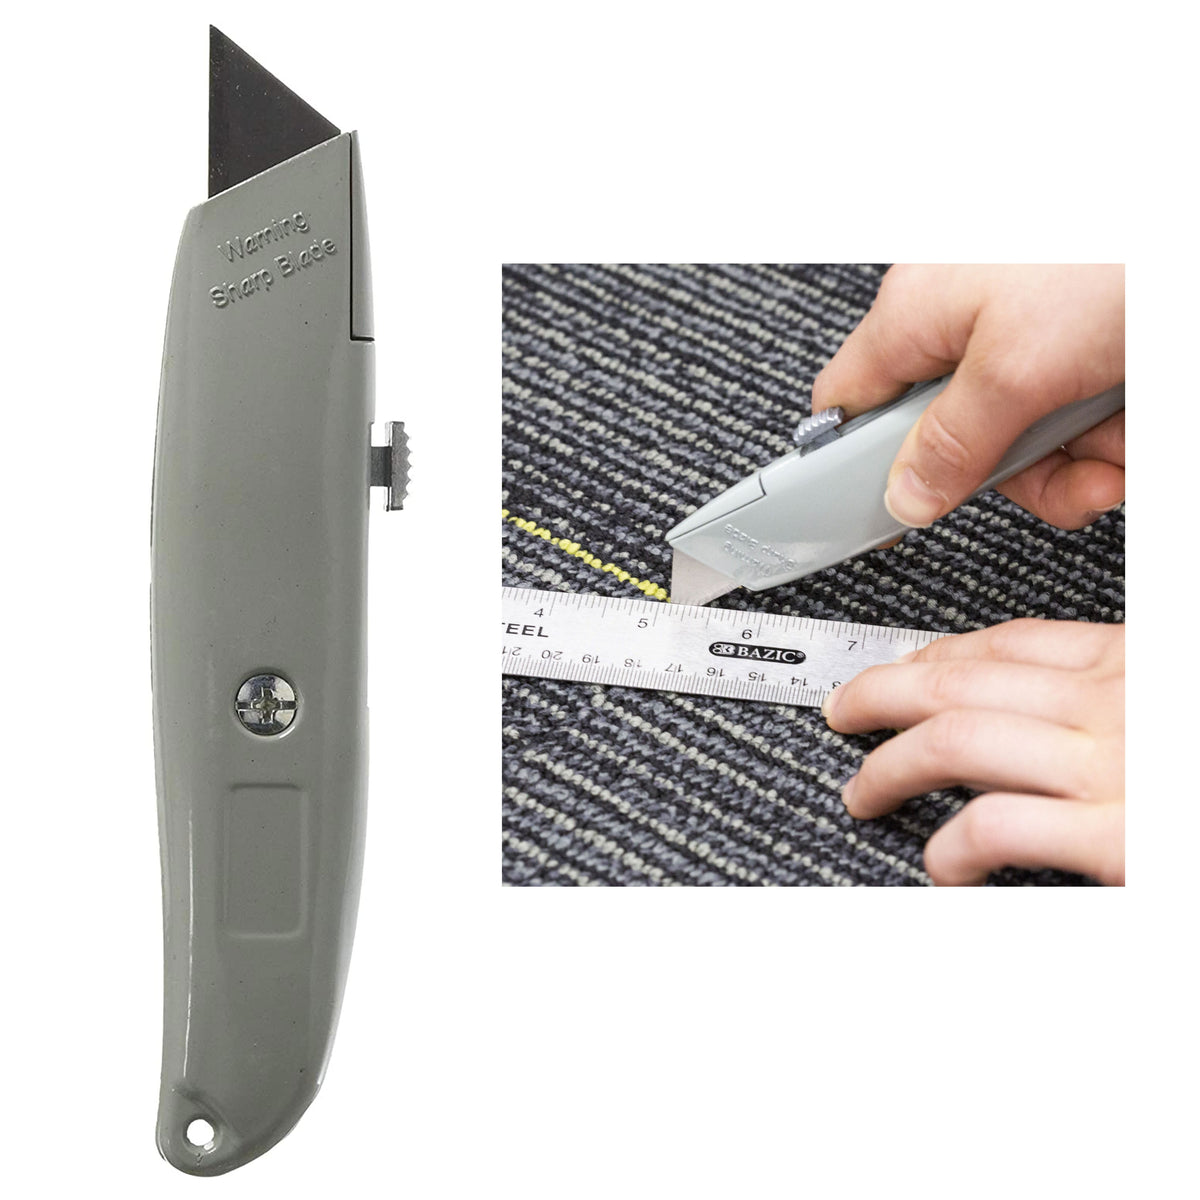 Box Cutter Utility Knife with Retractable Blades